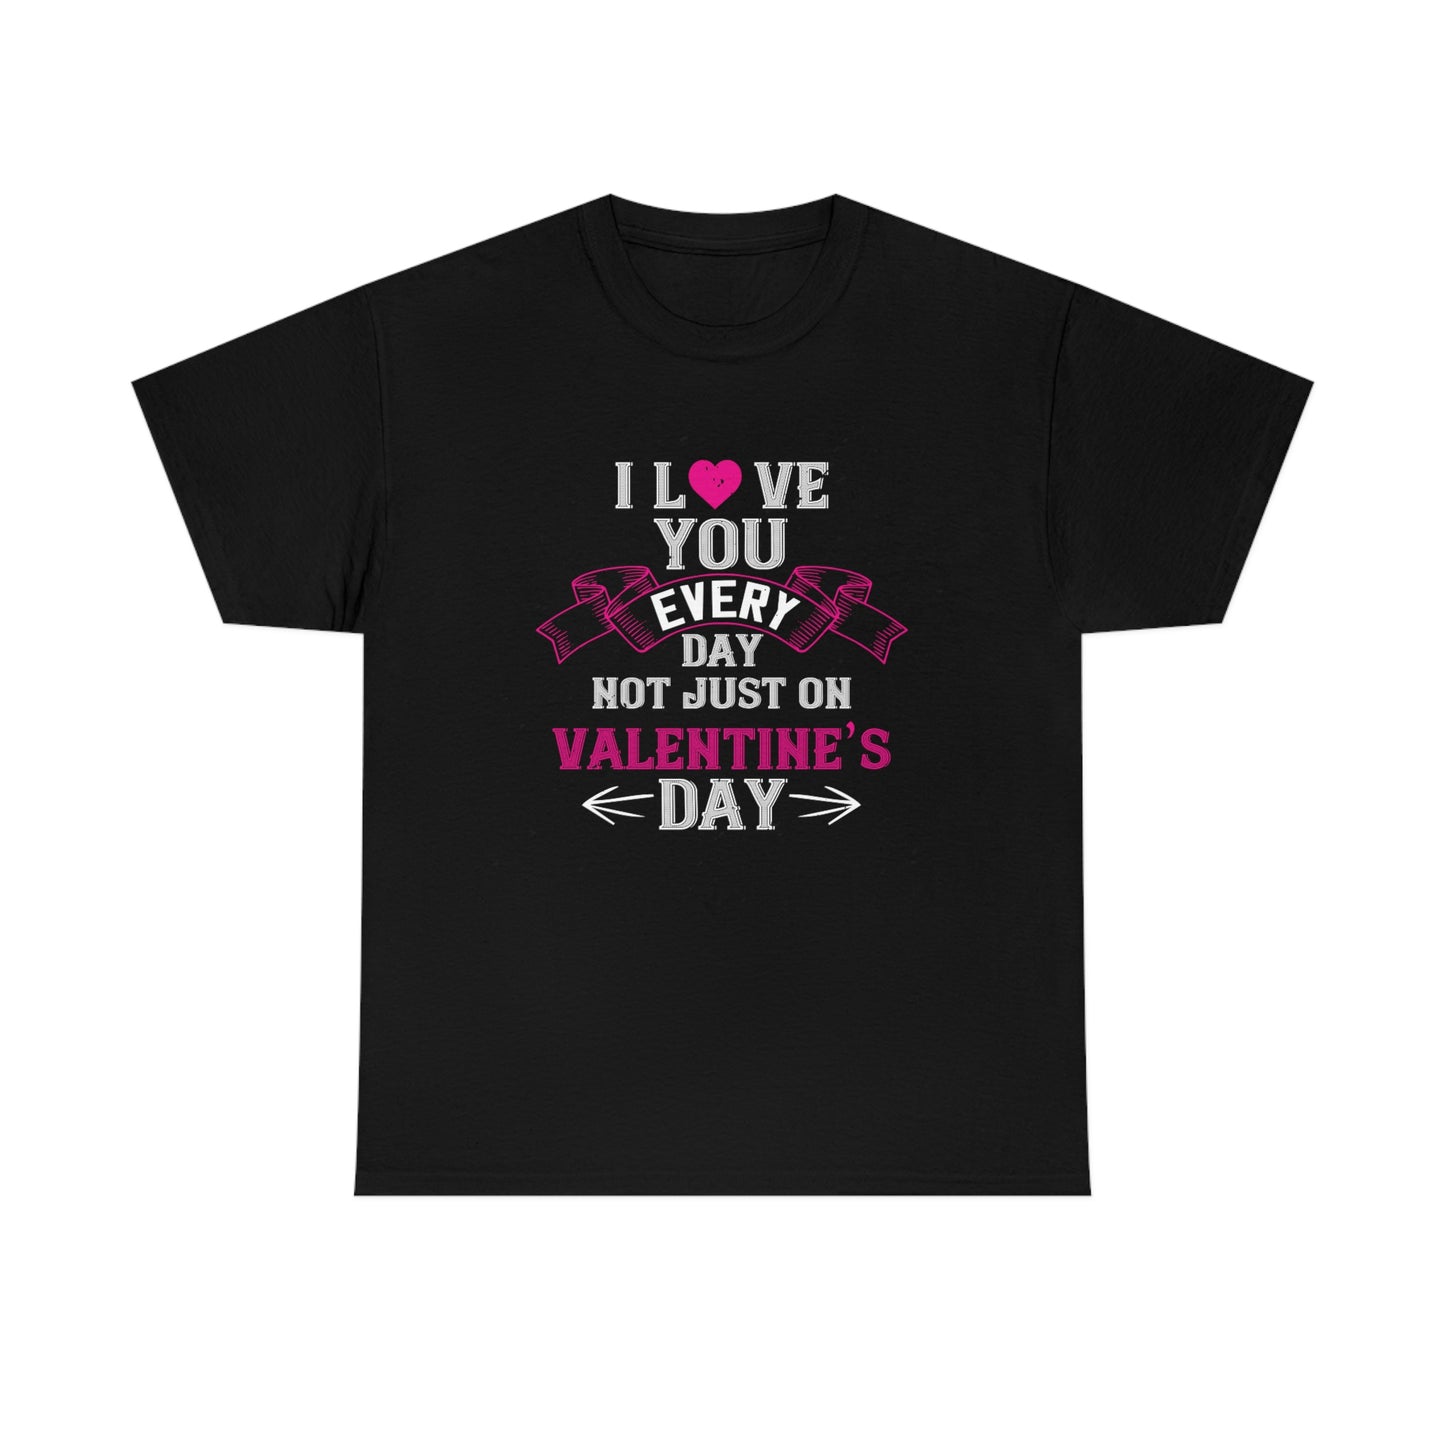 I Love You Every Day Cotton Tee